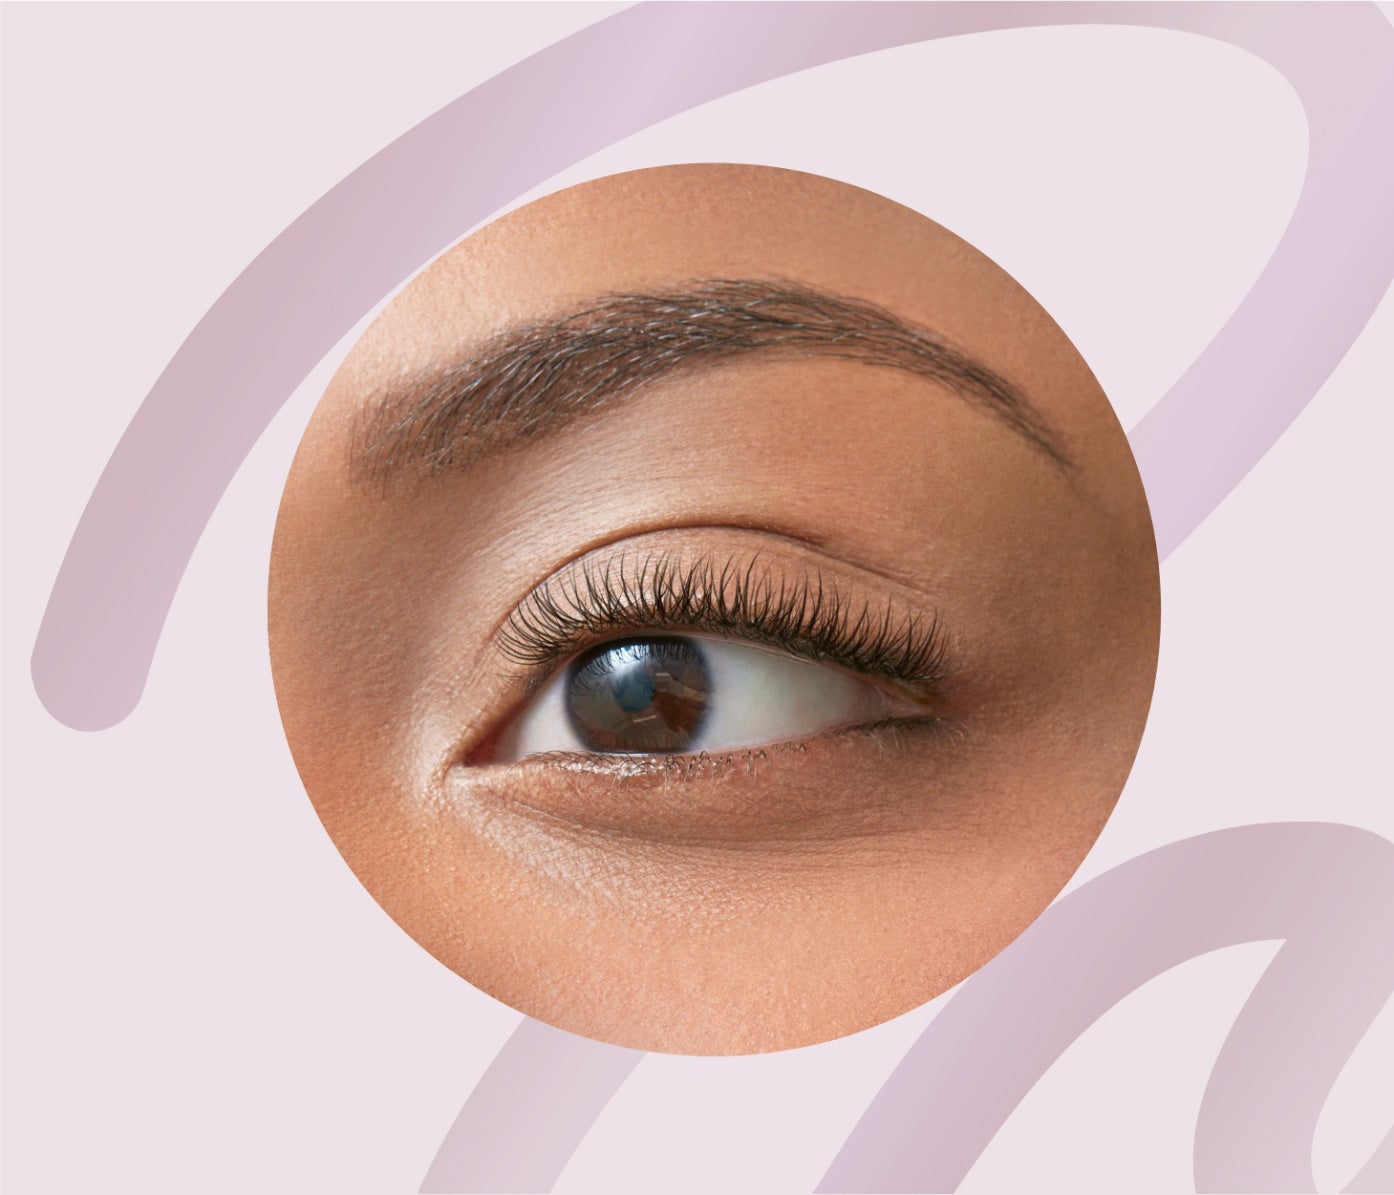 Close-up of a woman's eye with expertly tinted eyelashes and eyebrows at The Lash Lounge, enhancing natural color and definition.